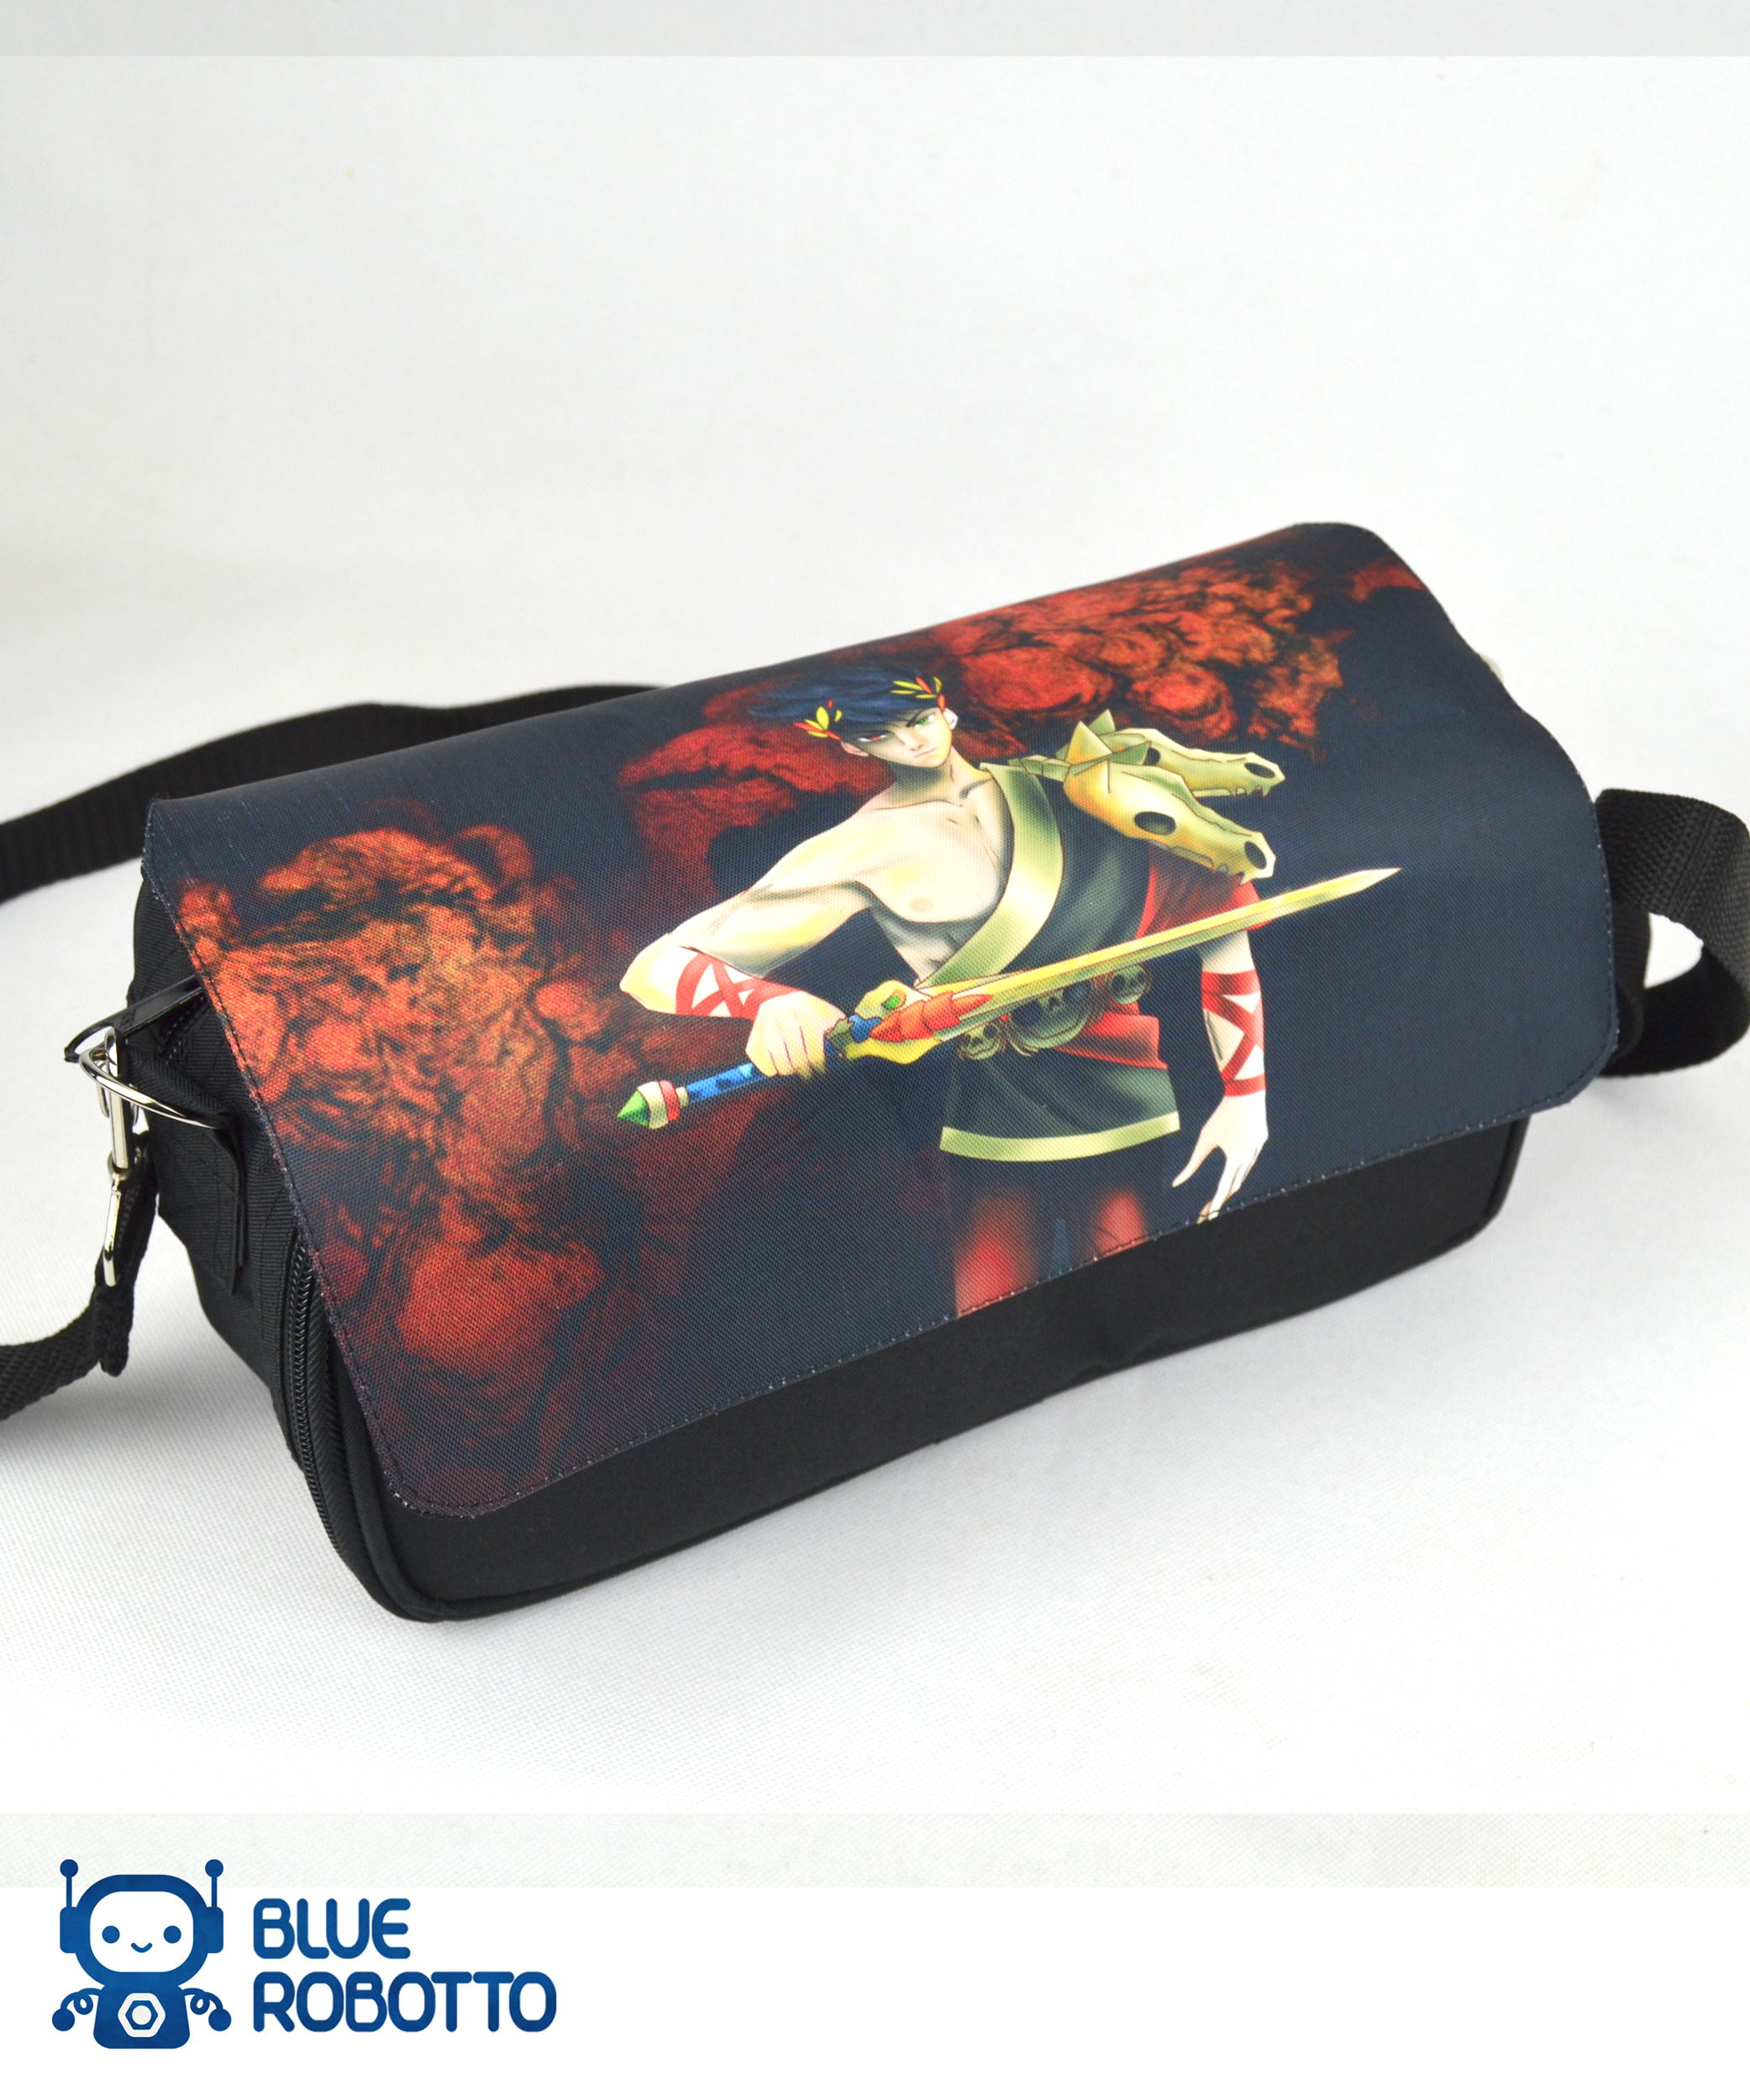 Hades - Nintendo Switch and accessories bag